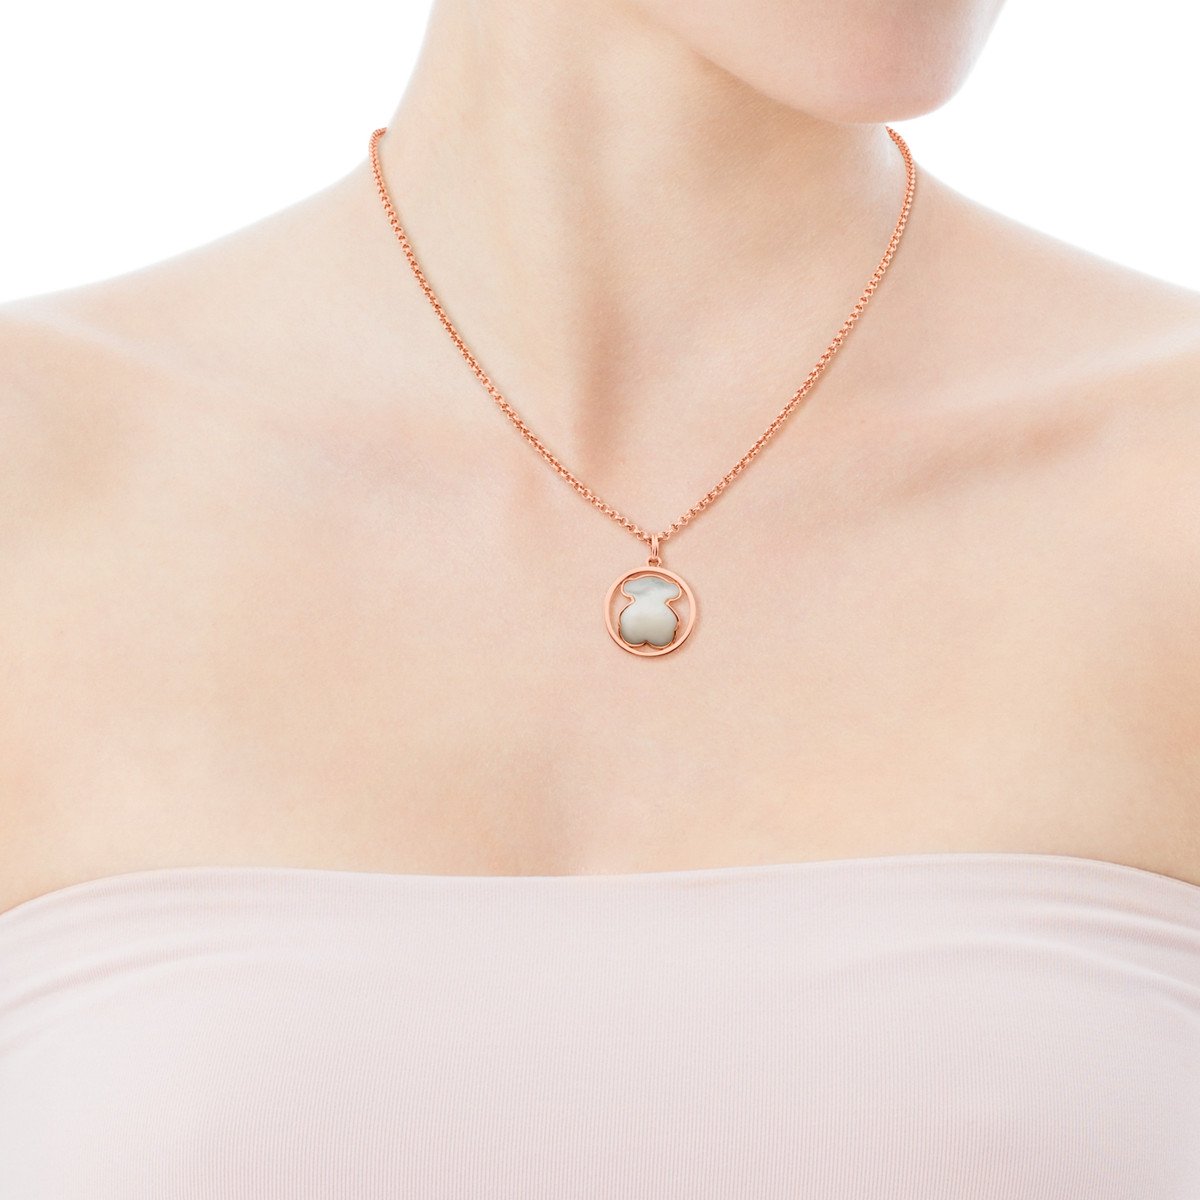 Tous Rose Vermeil Silver Camille Pendant with Mother-of-Pearl 71216461 –